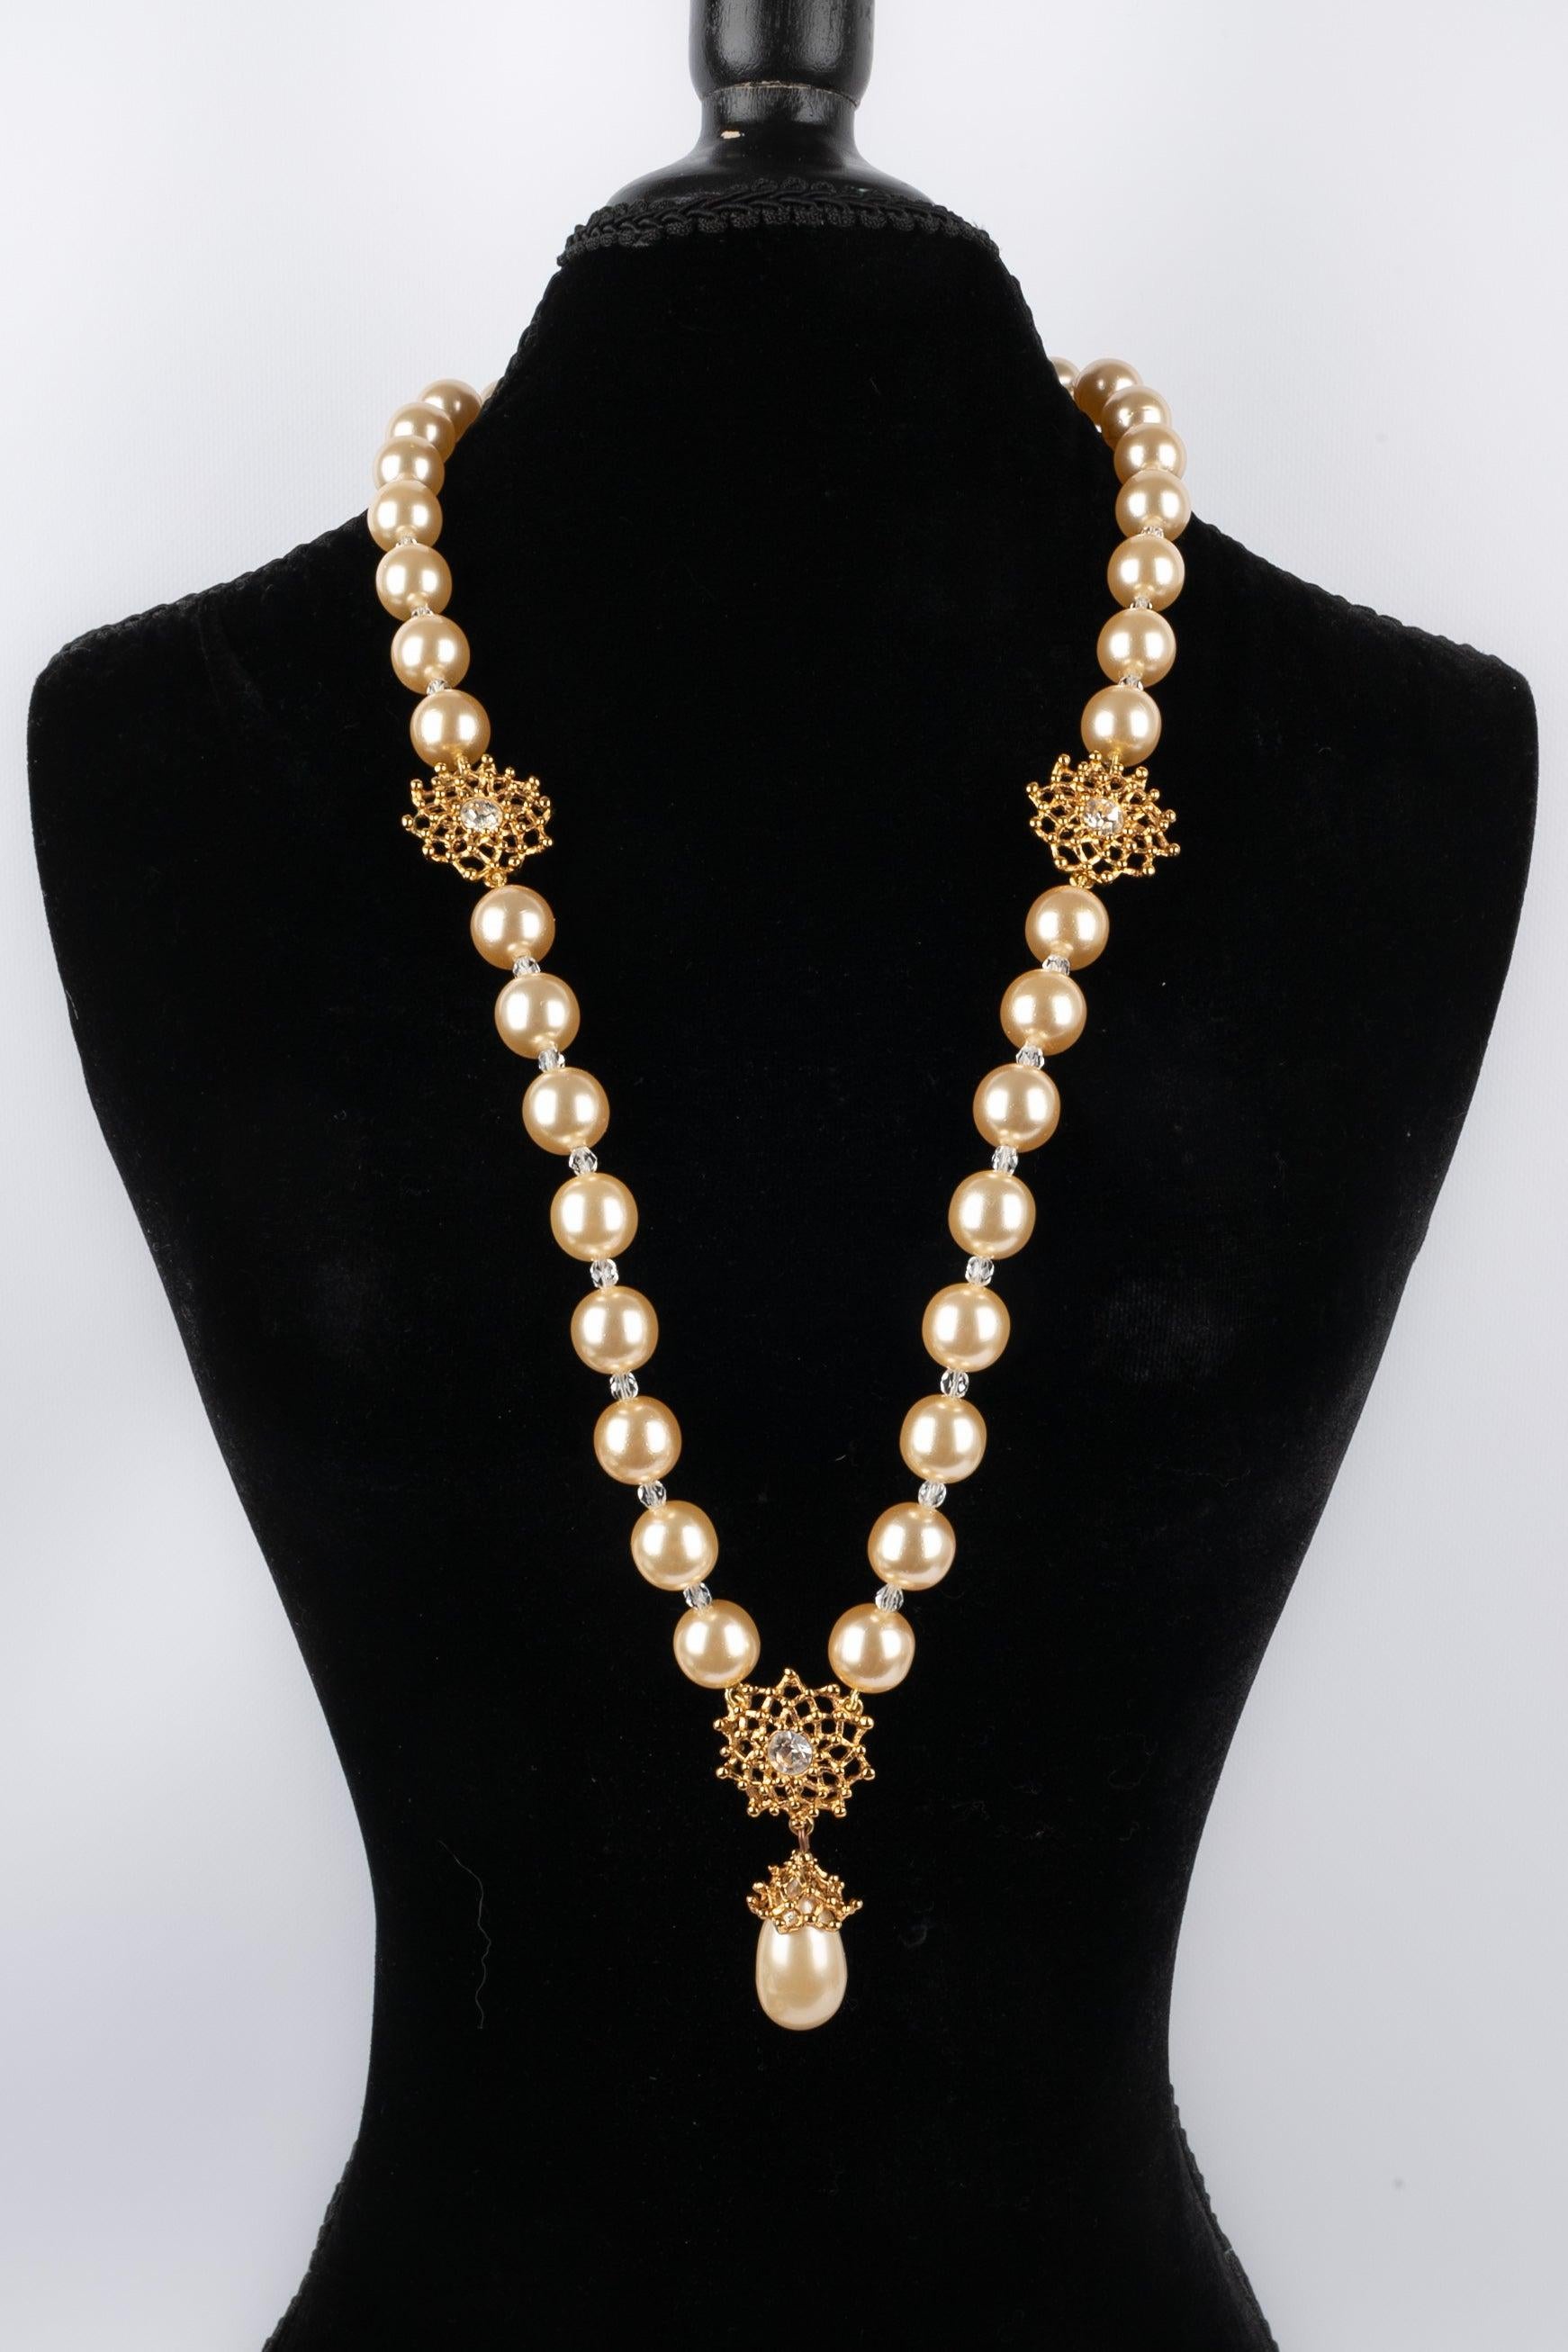 Yves Saint Laurent - (Made in France) Costume pearl necklace with rhinestones and golden metal elements. Jewelry from the middle of the 1980s. To be mentioned, some pearls are flaked off.

Additional information:
Condition: Very good